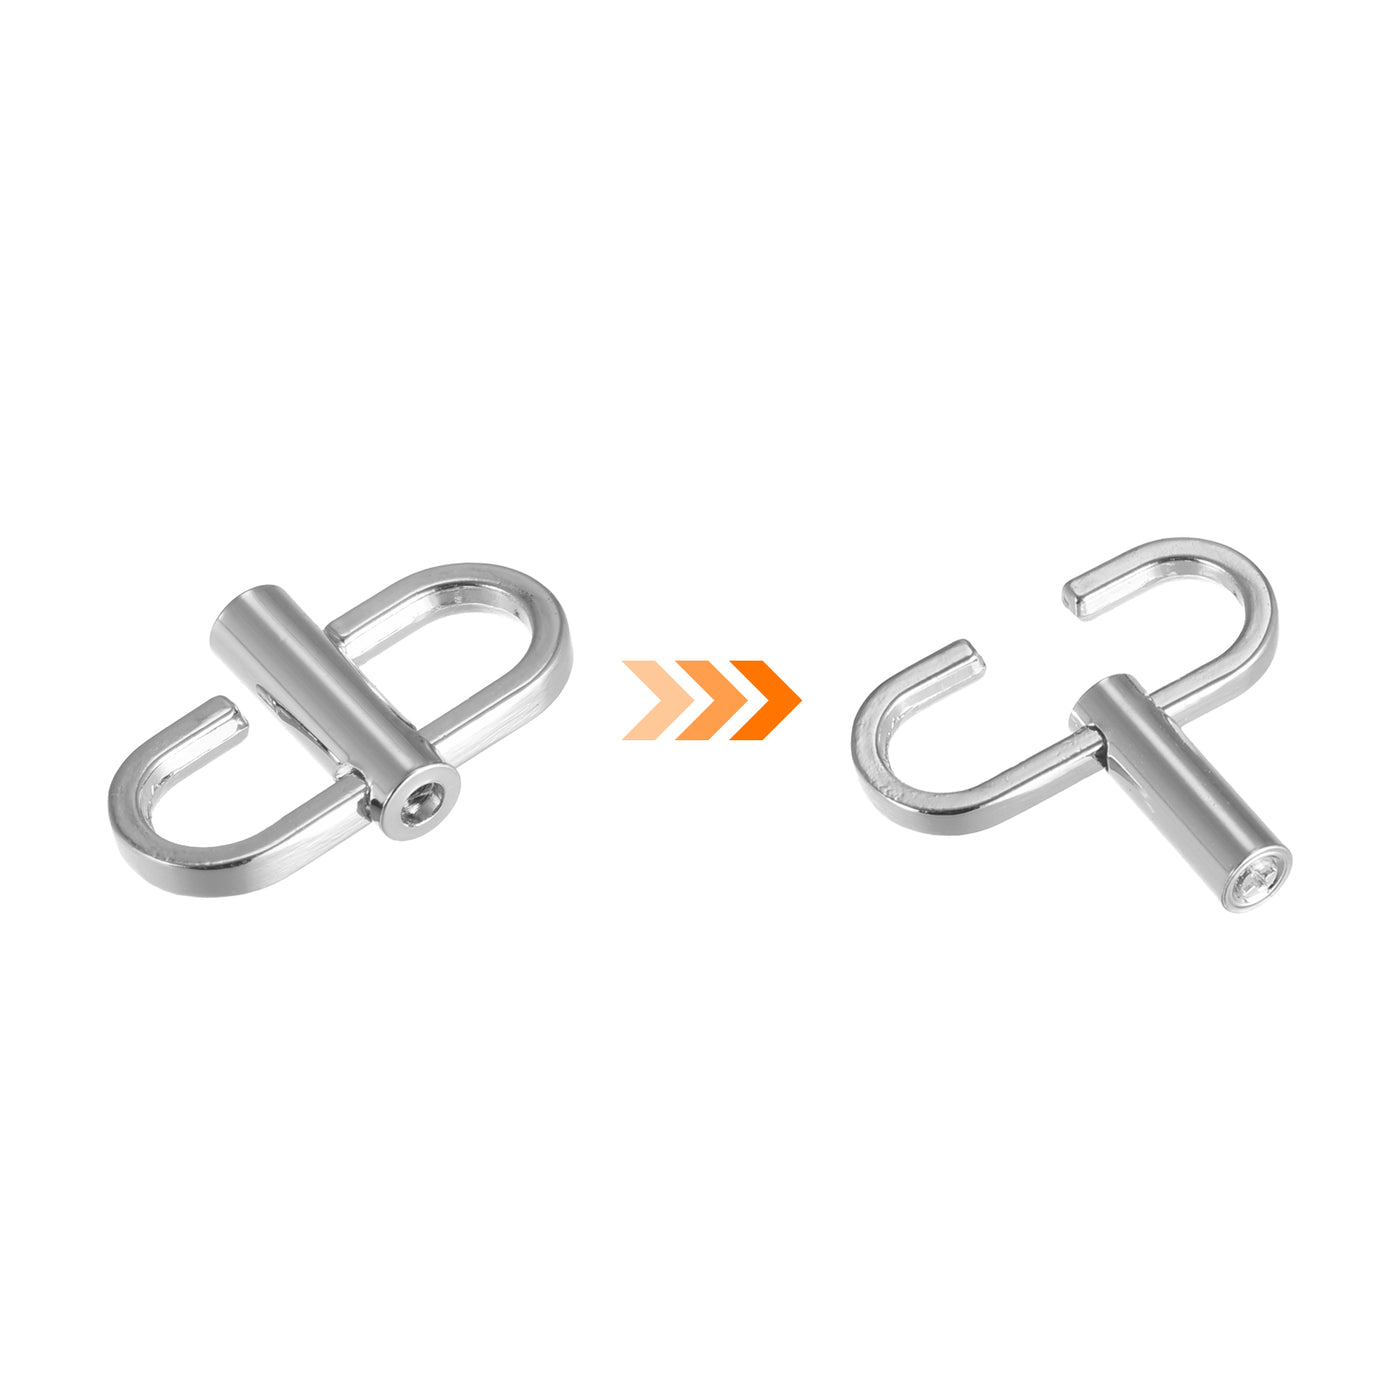 uxcell Uxcell Adjustable Metal Buckles for Chain Strap, 5Pcs 23x14mm Chain Shortener, Silver